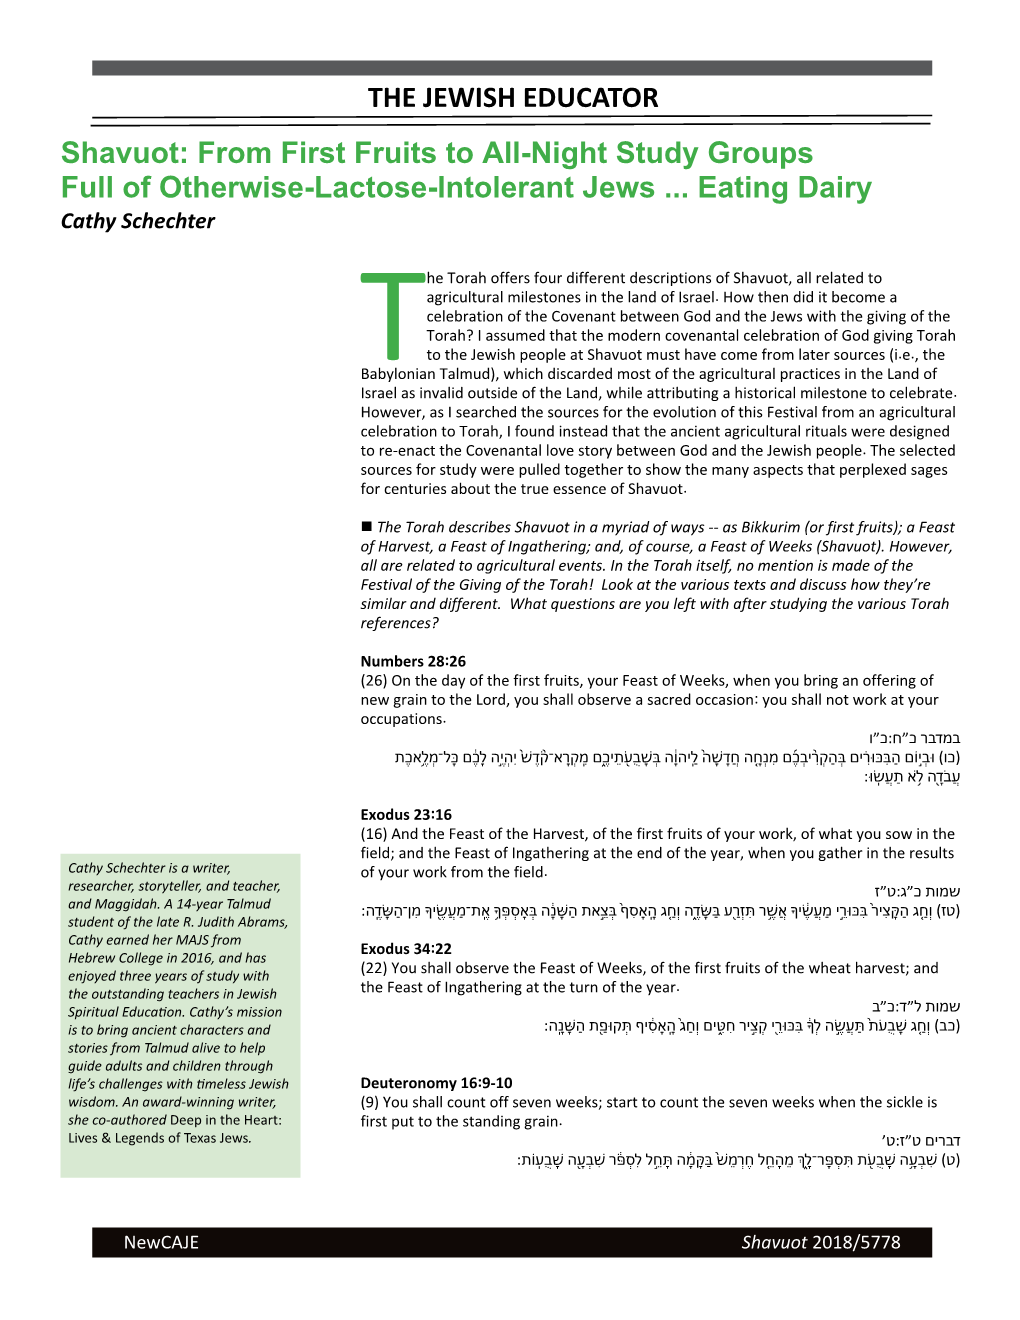 From First Fruits to All-Night Study Groups Full of Otherwise-Lactose-Intolerant Jews ... Eating Dairy Cathy Schechter